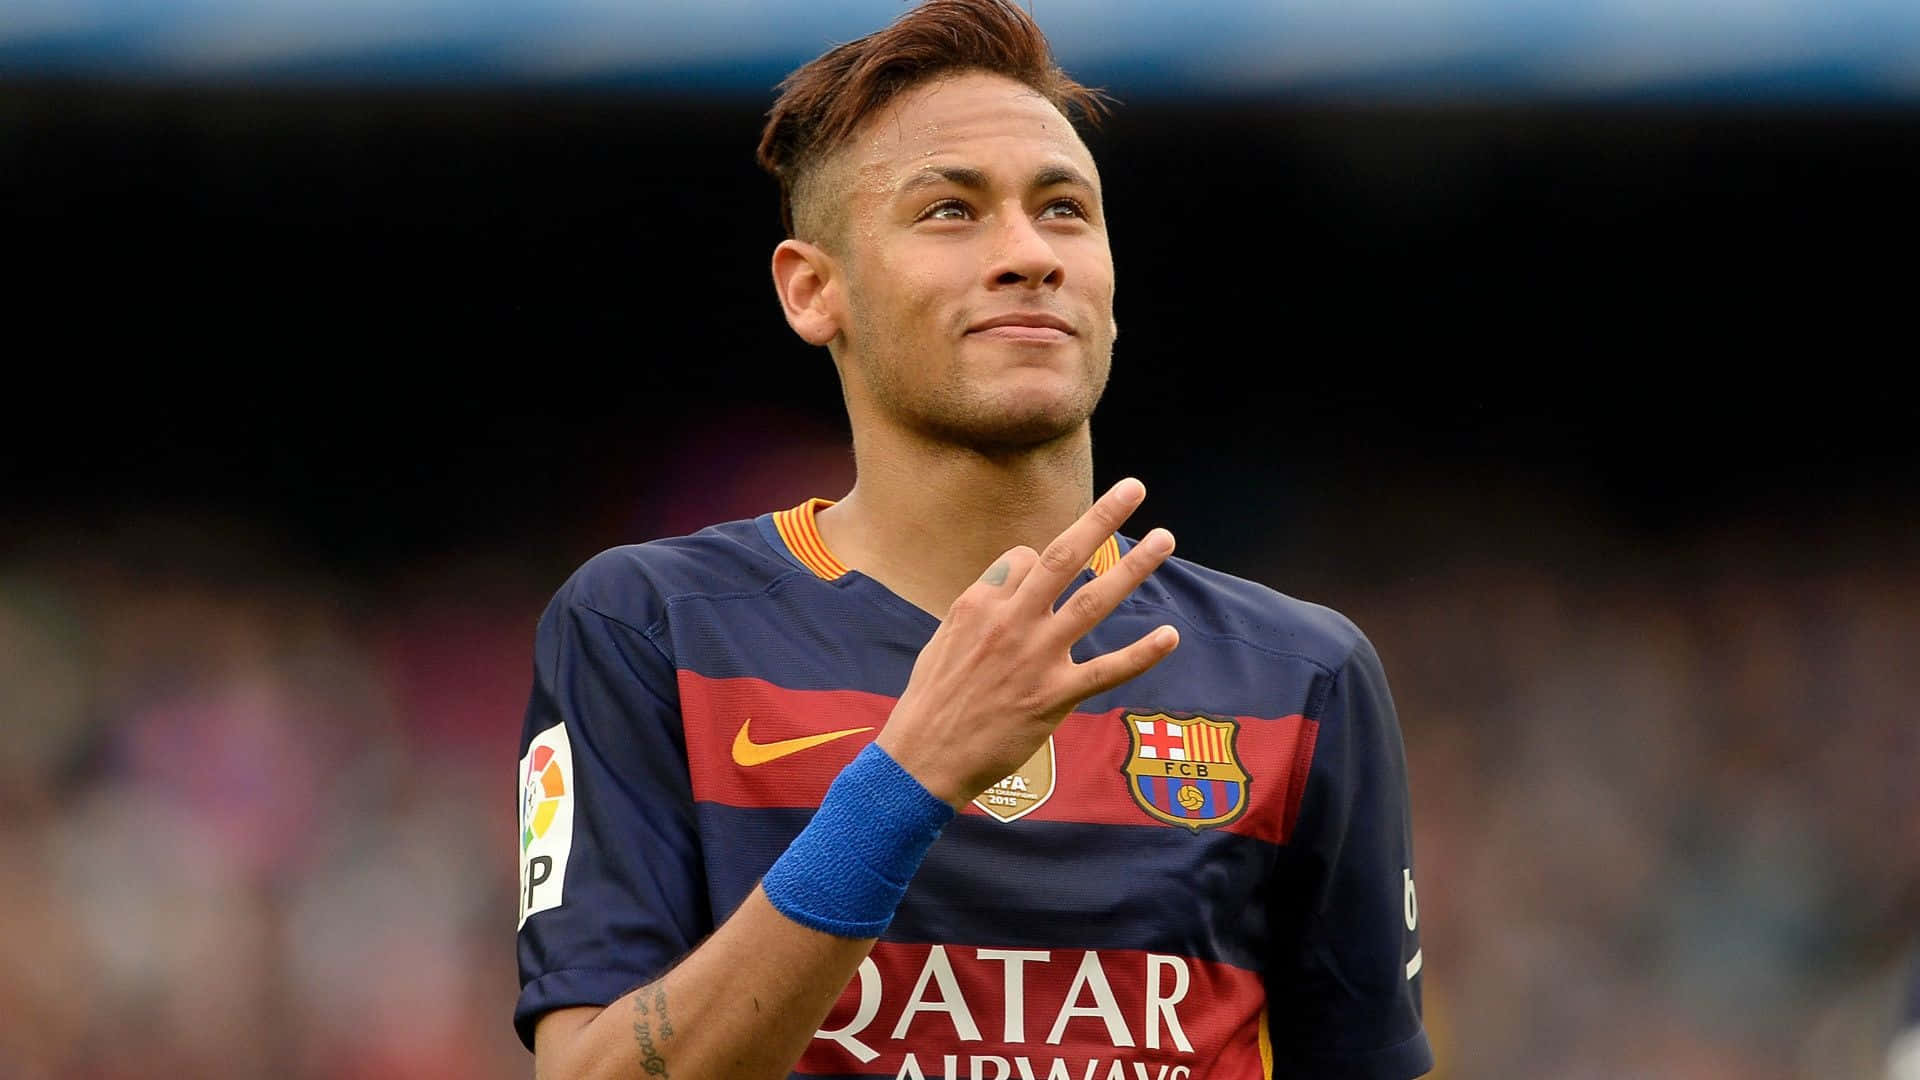 Neymar Wallpaper Soccer - Free download and software reviews - CNET Download